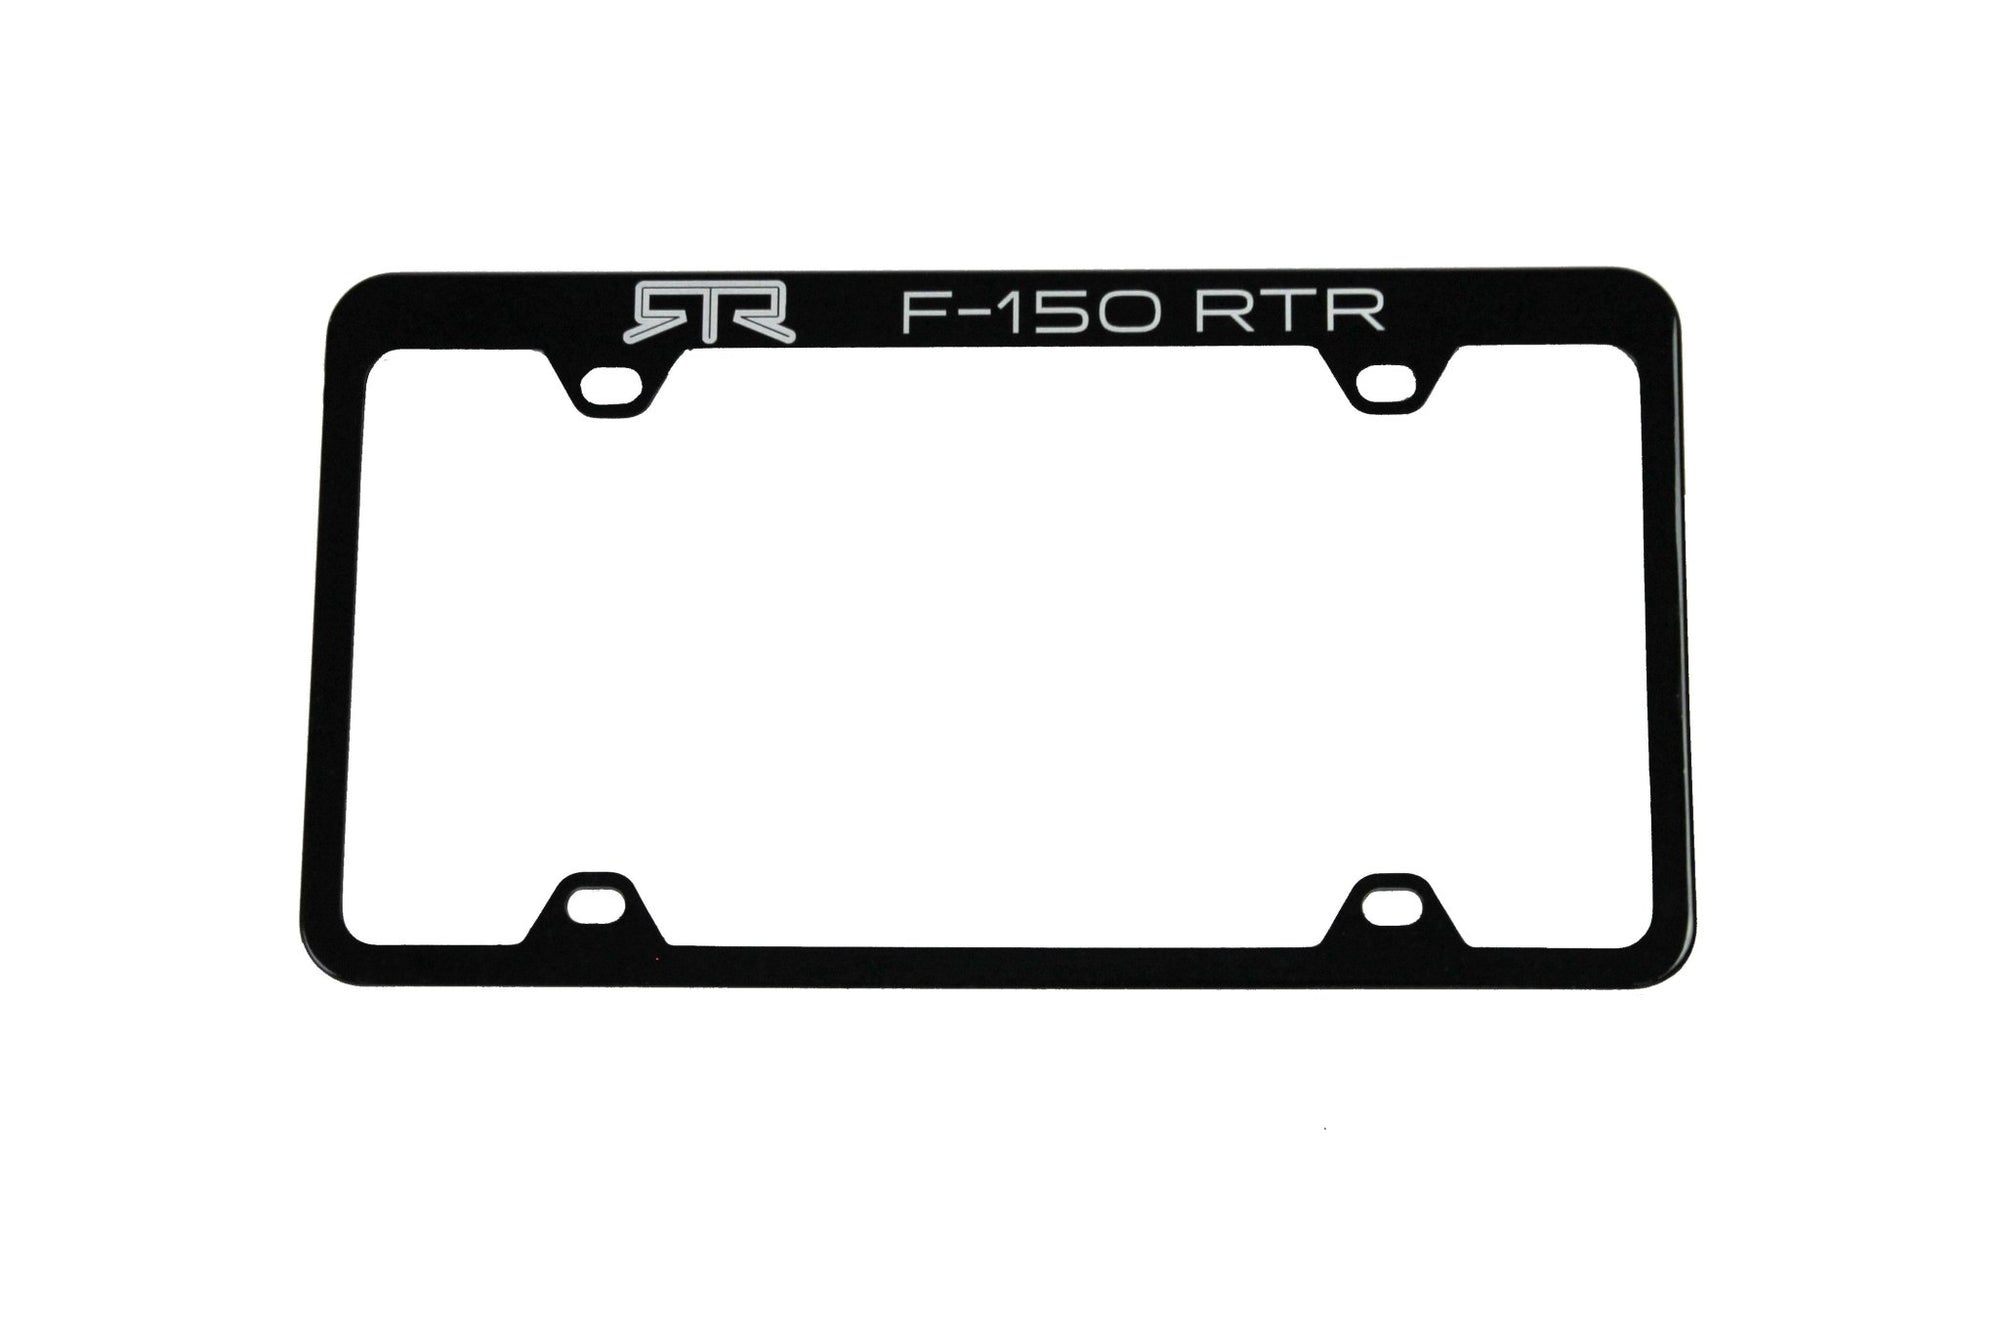 F-150 RTR License Plate Frame - RTR Vehicles